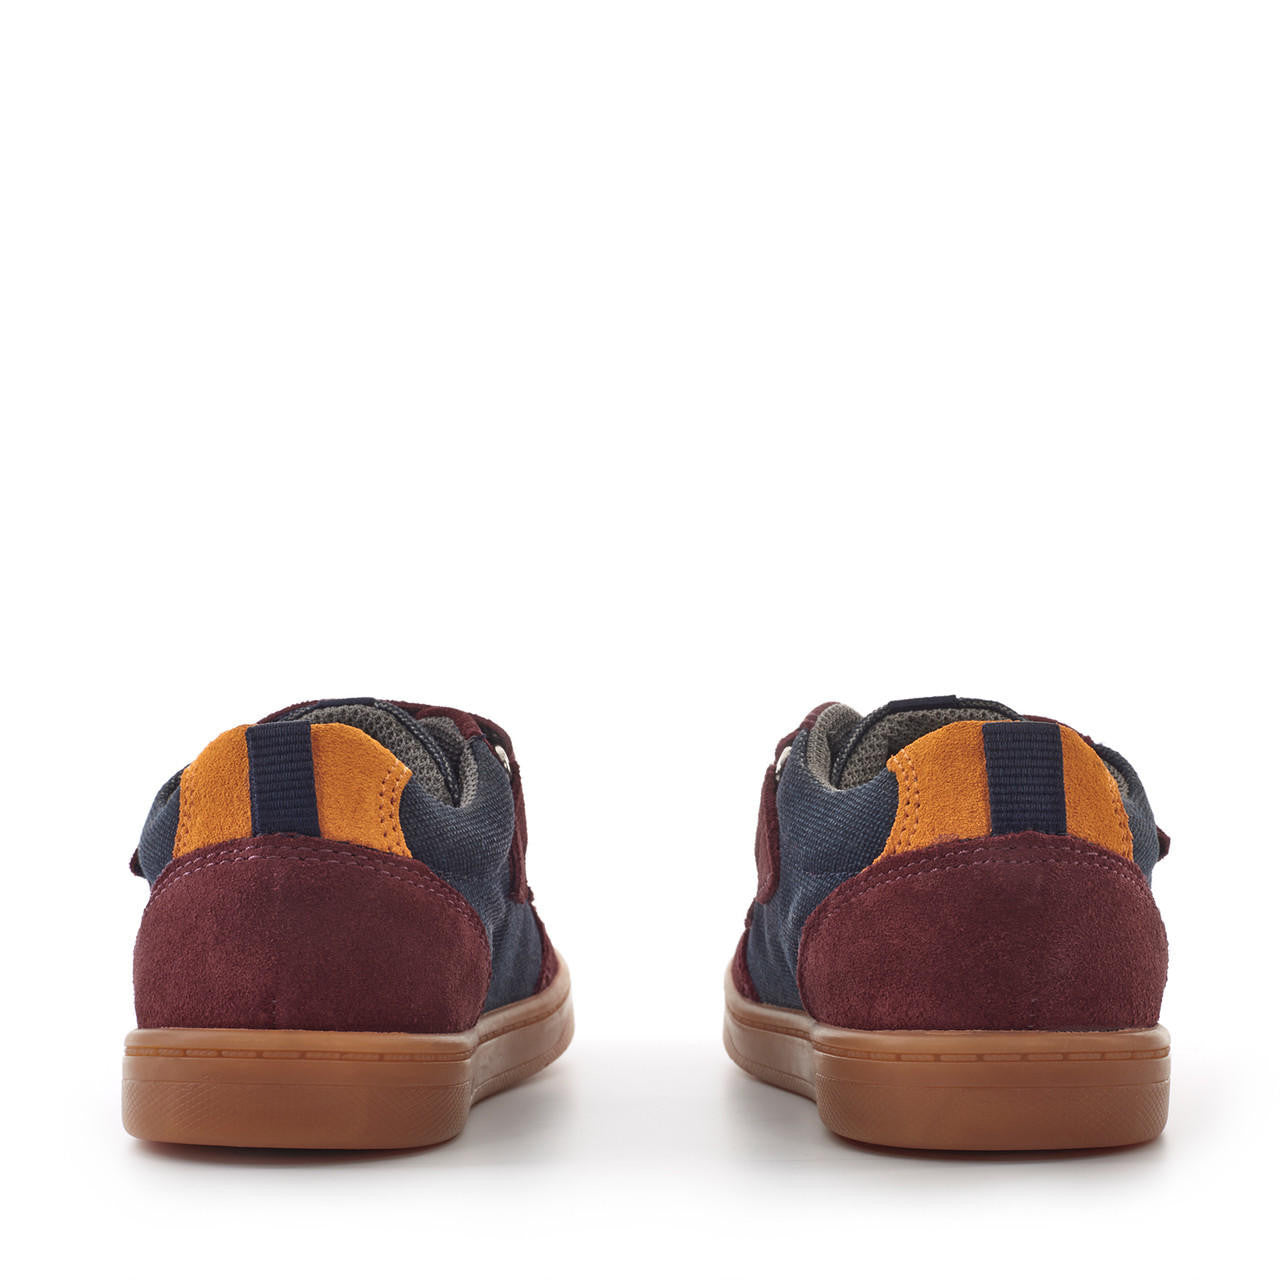 A boys casual shoe by Start-Rite, style is Enigma in wine and navy suede and canvas with double velcro fastening. Back view of a pair.